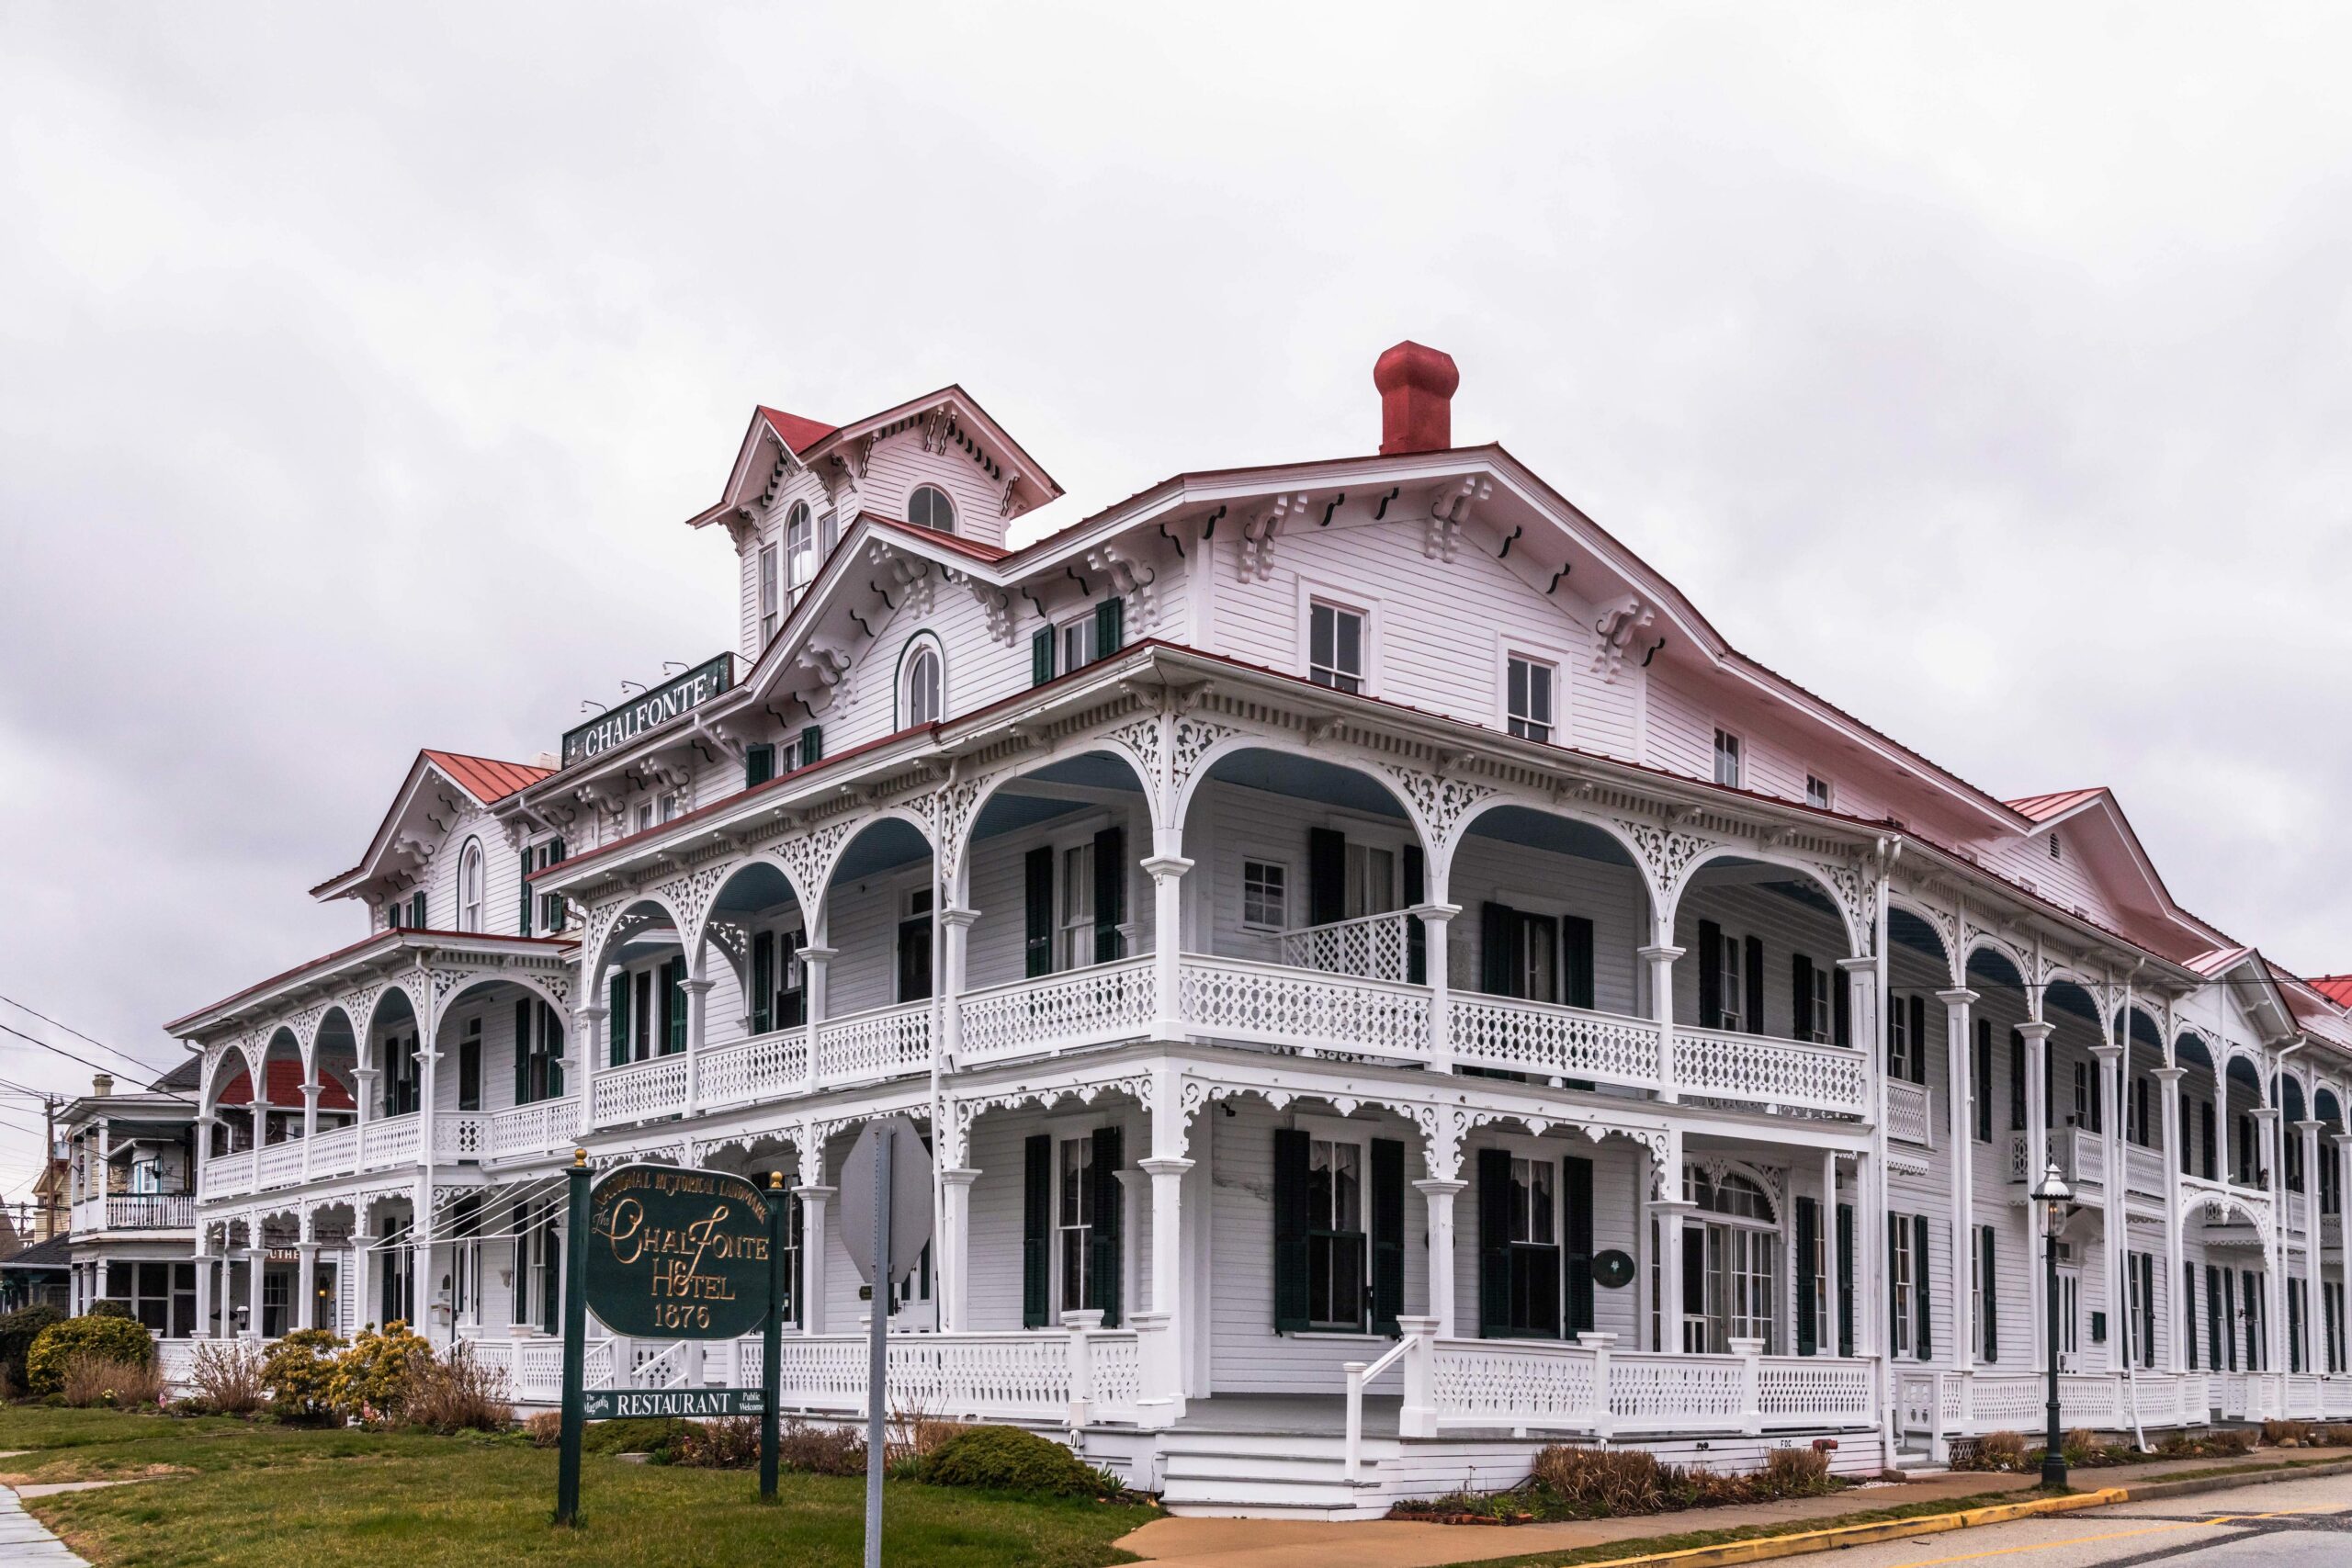 The Chalfonte Hotel, a white and green Victorian style building, with clouds in the sky